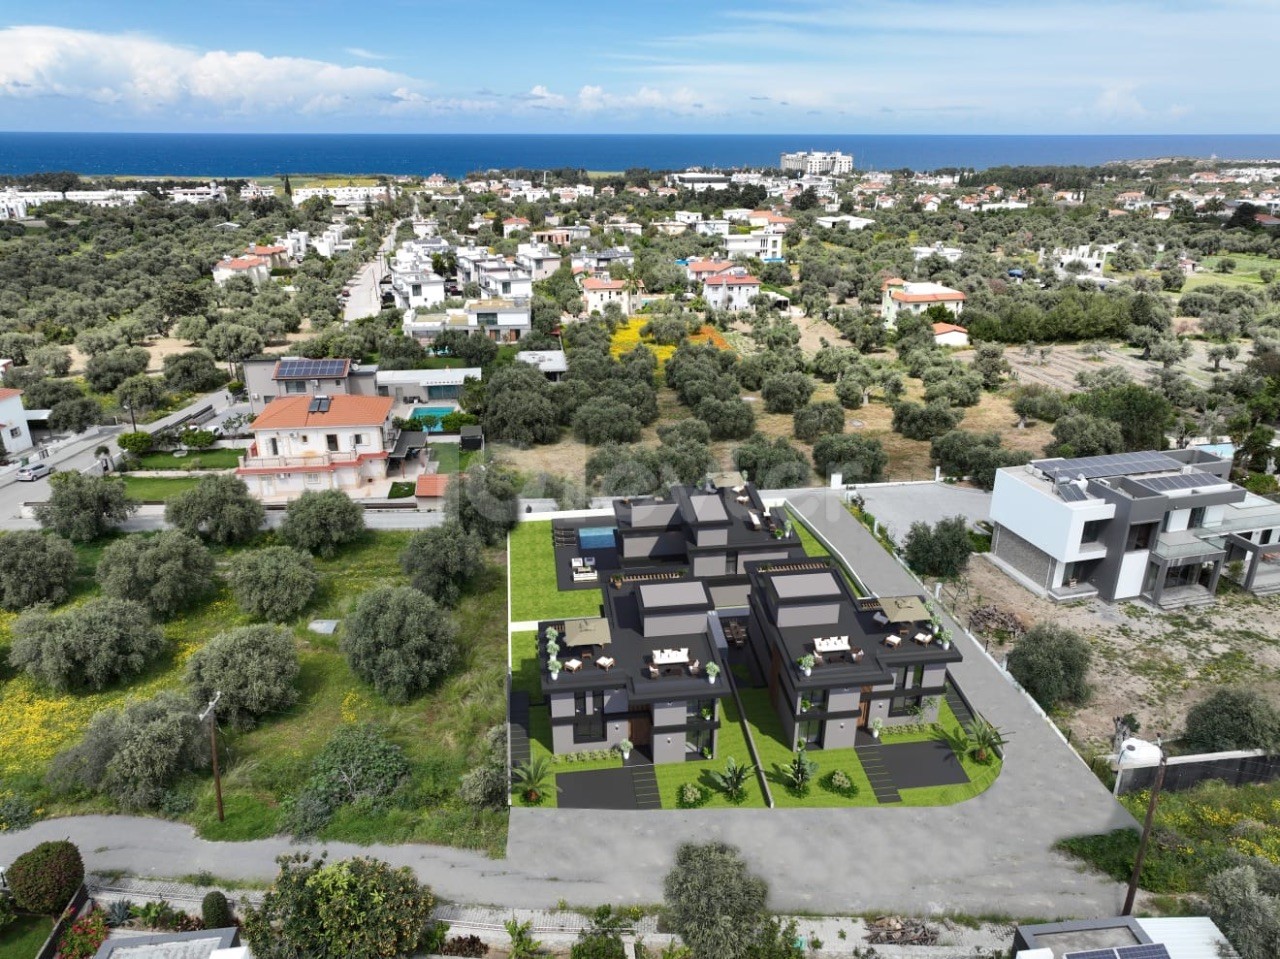 2000 m2 LAND FOR SALE IN GİRNE/OZANKÖY WITH 3 VILLAS PROJECT WITH MOUNTAIN AND SEA VIEWS WITH PAID LICENSES..0533 859 21 66